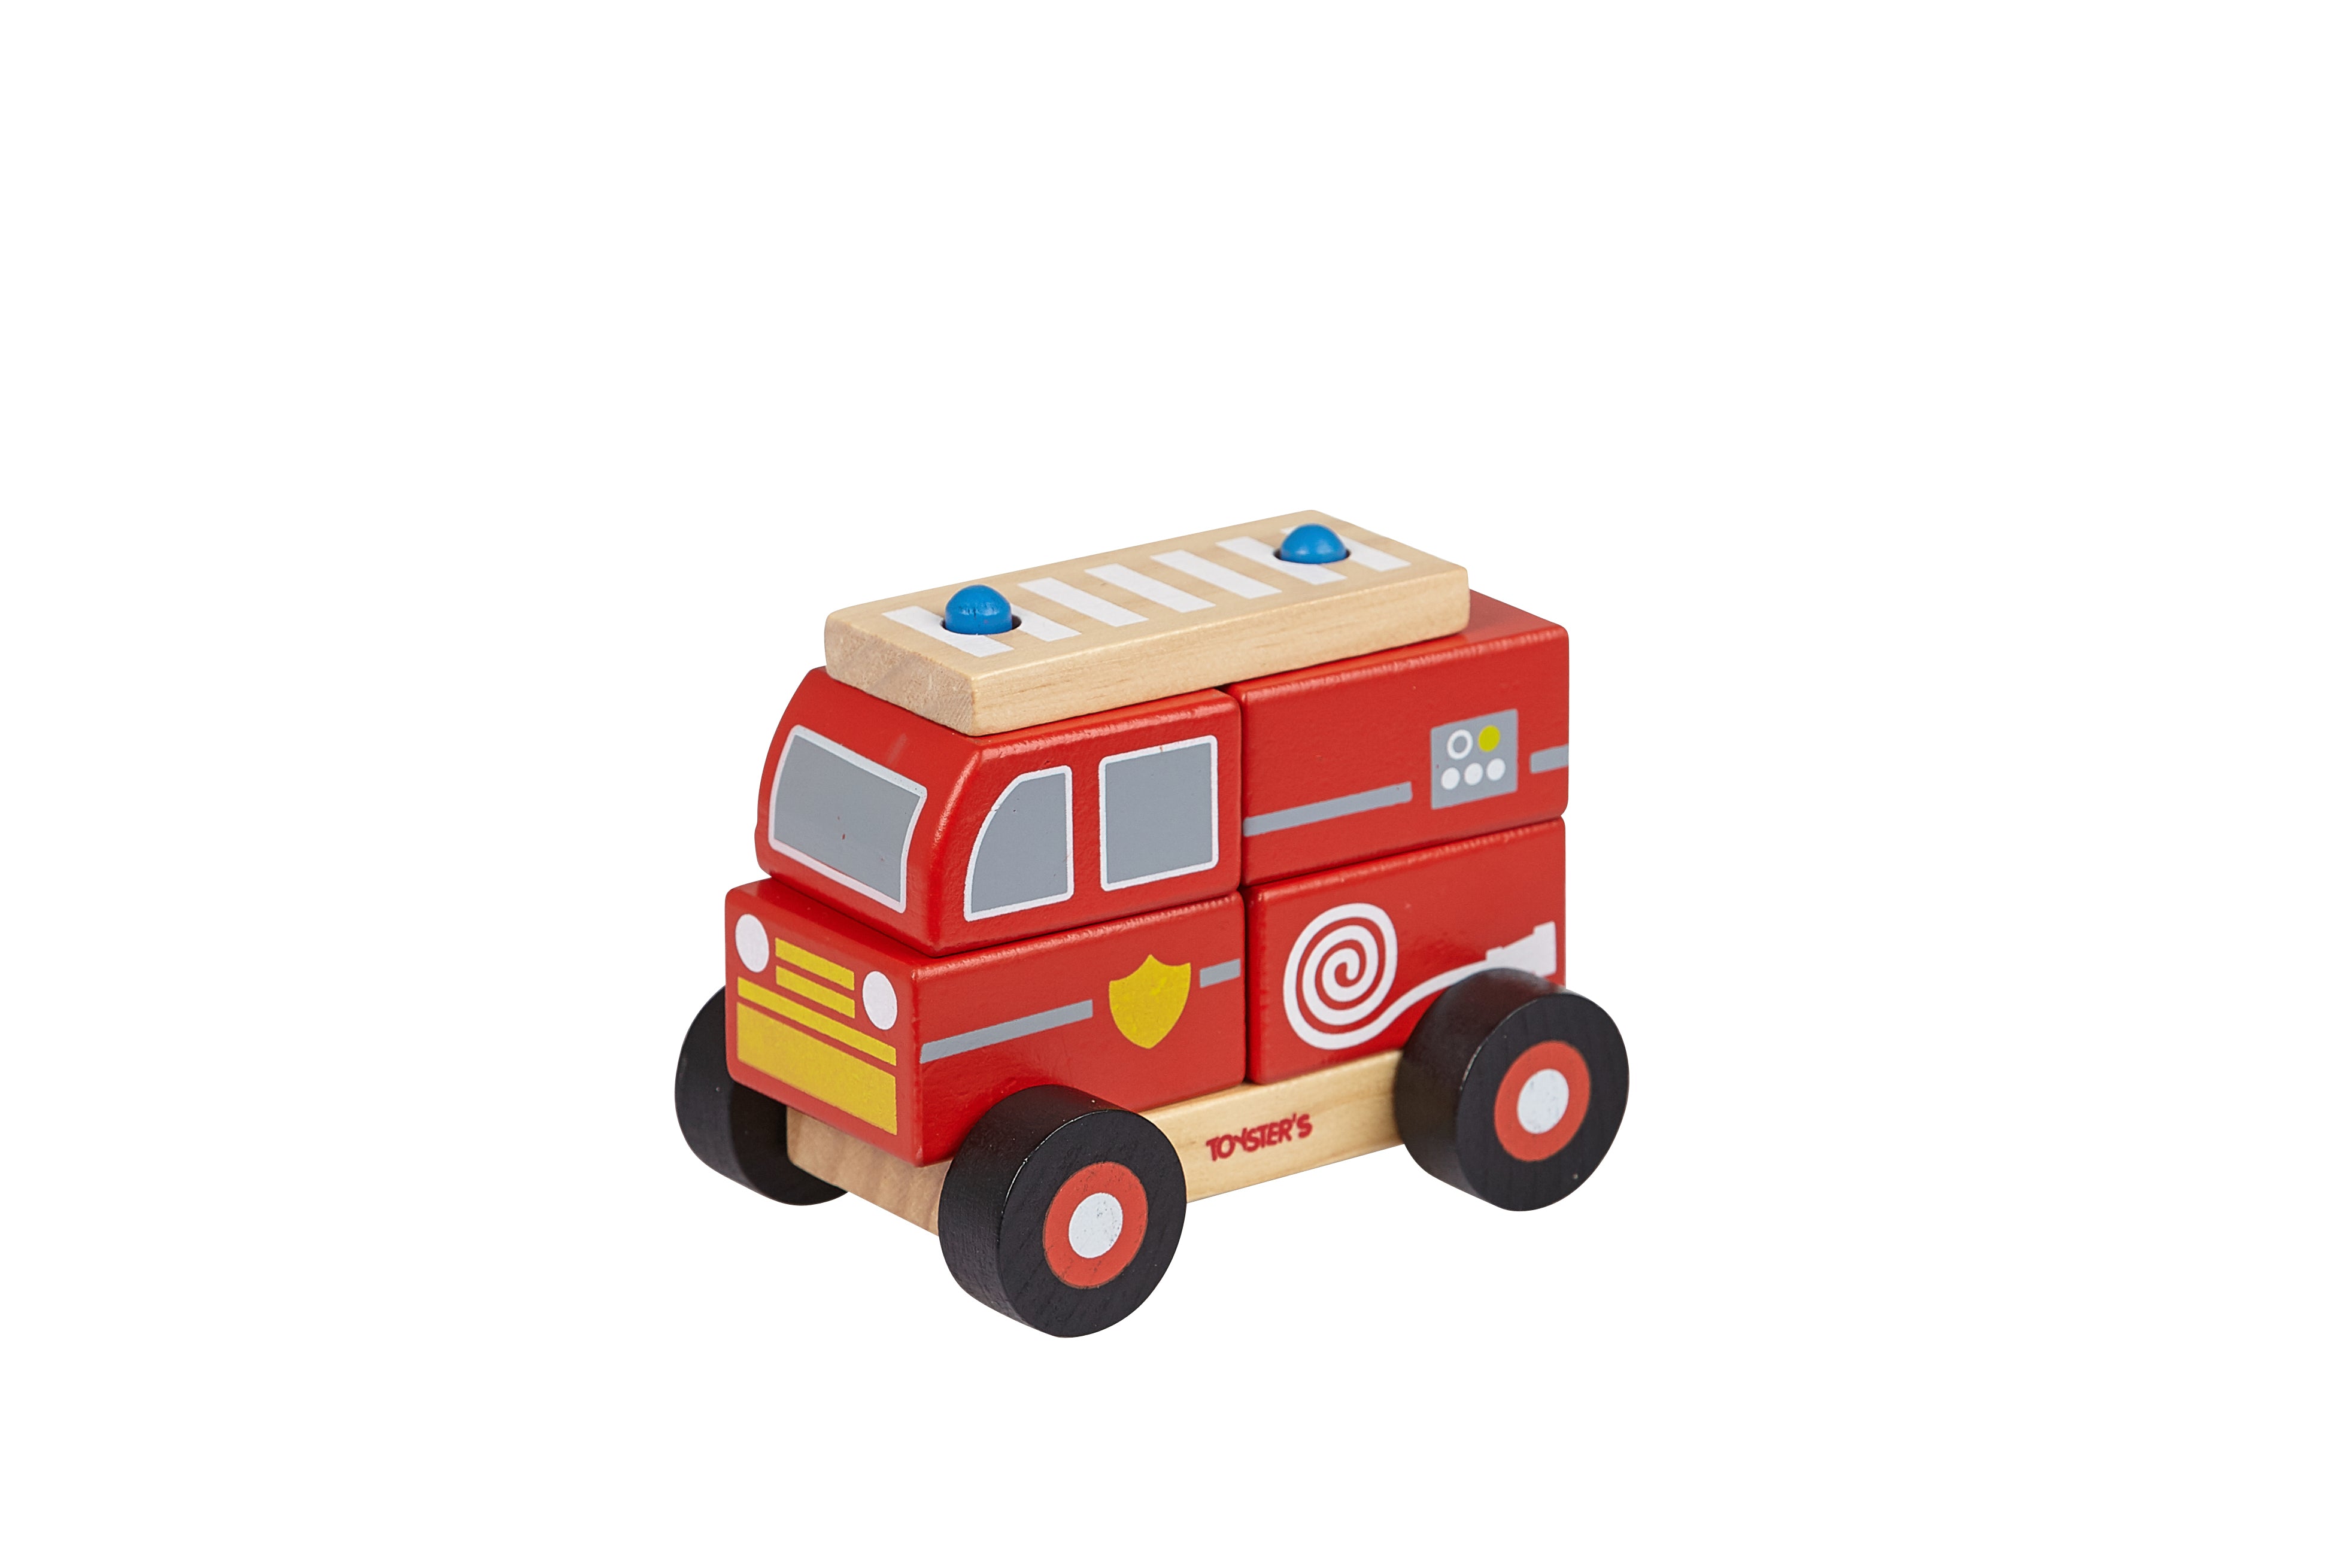 Toysters Wooden Firetruck Building Block Toy For Kids